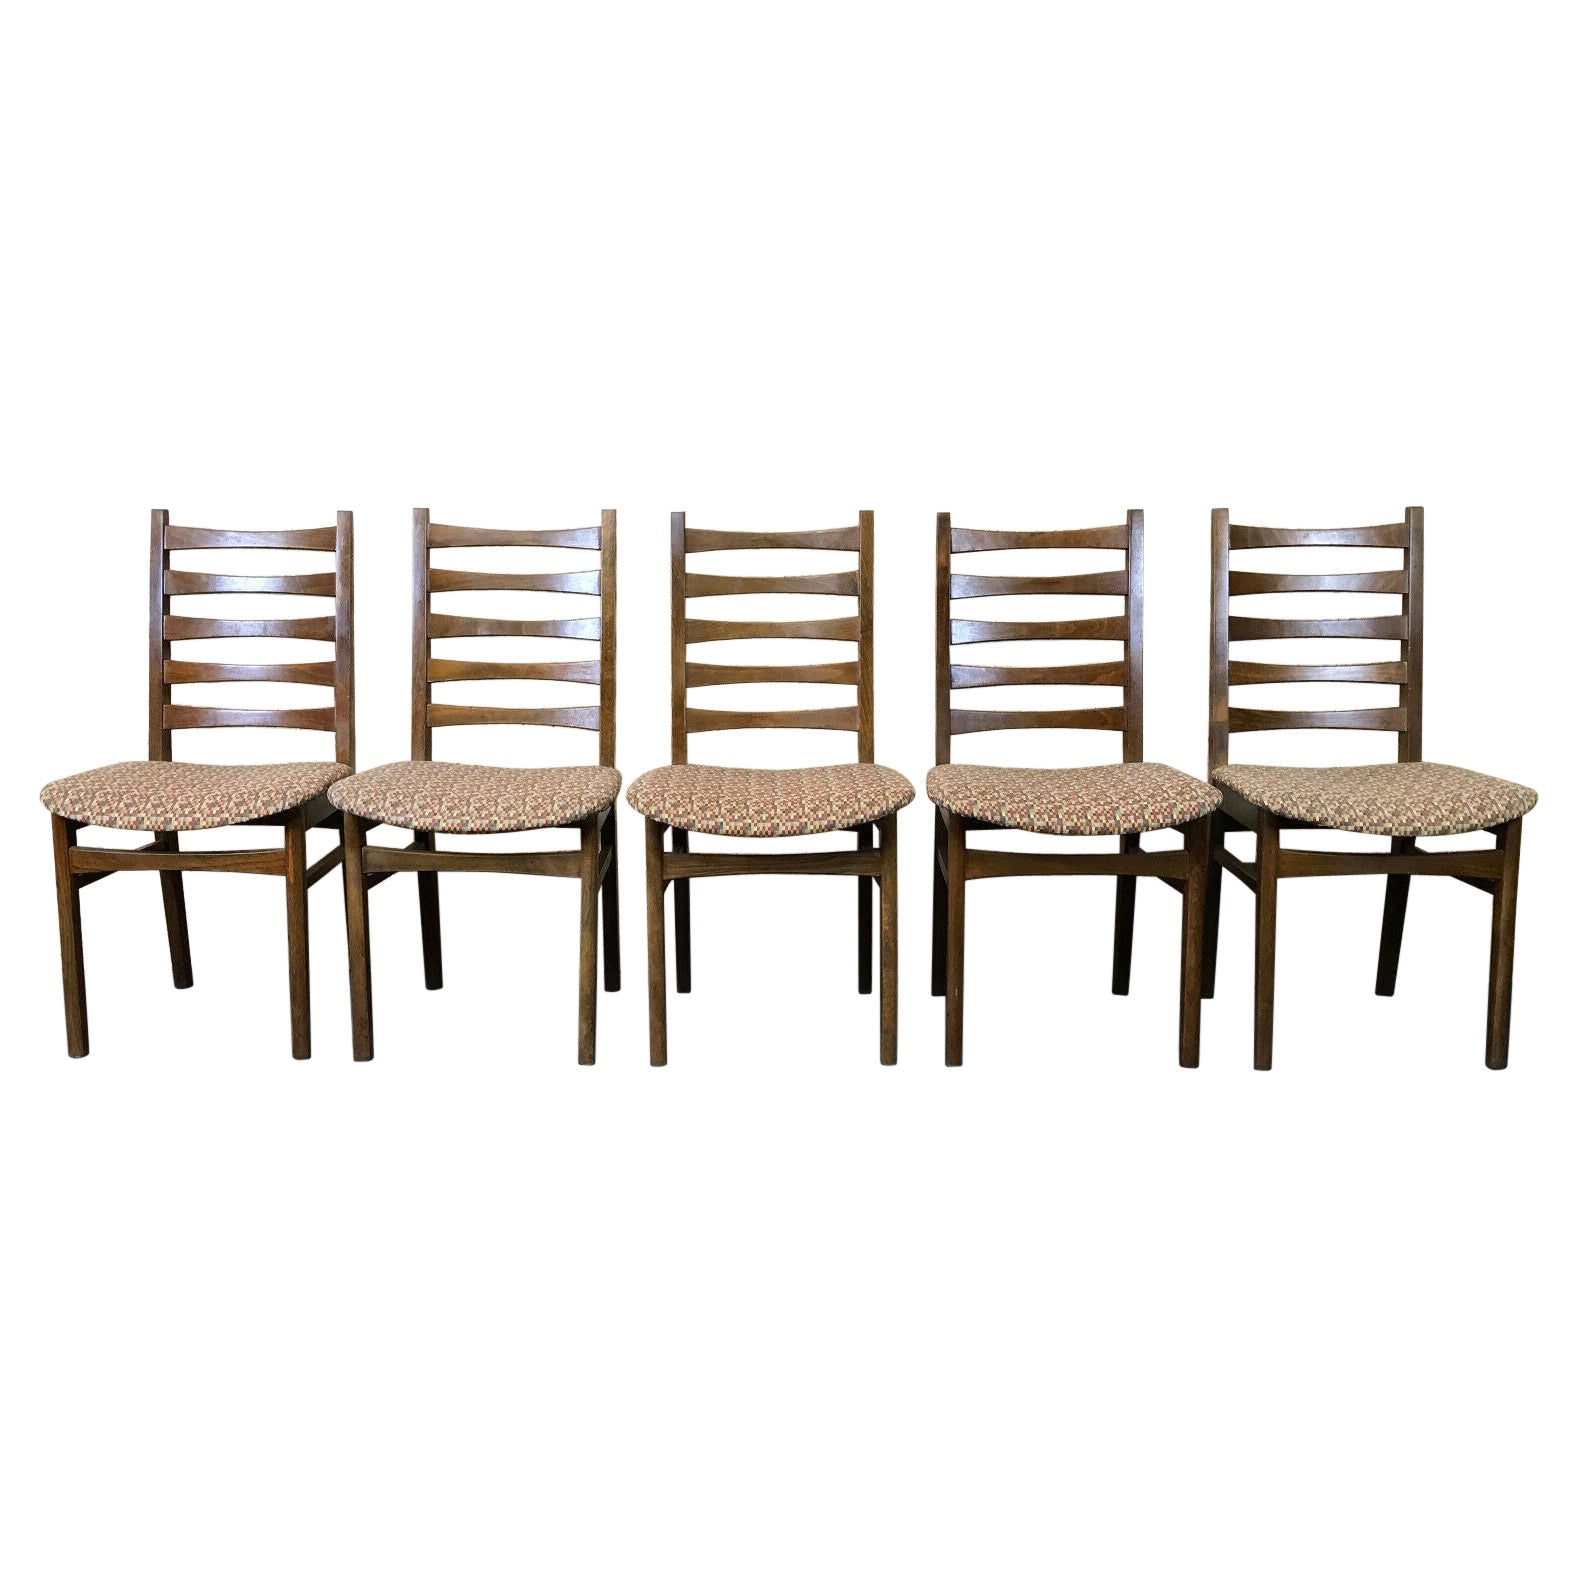 5x 60s 70s Chairs Dining Chair Danish Design 60s